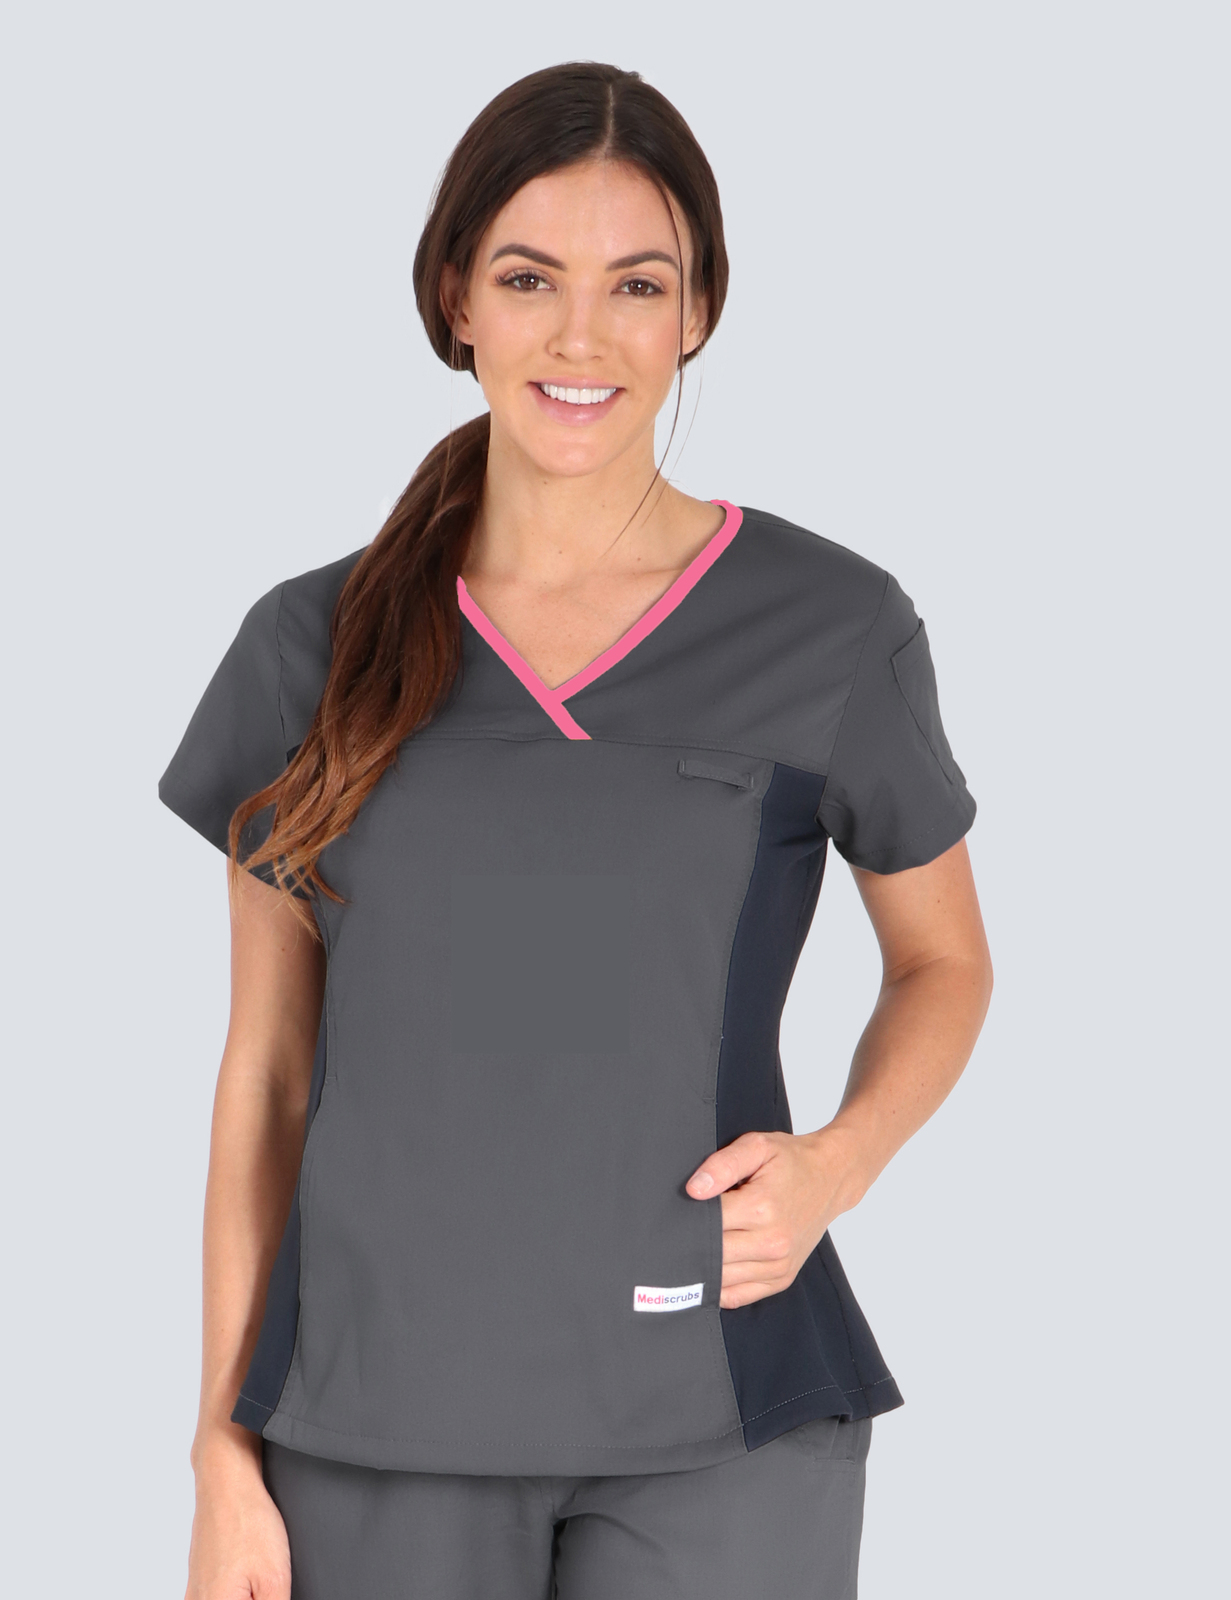 Ipswich Hospital - SCN (Women's Fit Spandex Scrub Top in Grey with Pink Trim incl Logos)